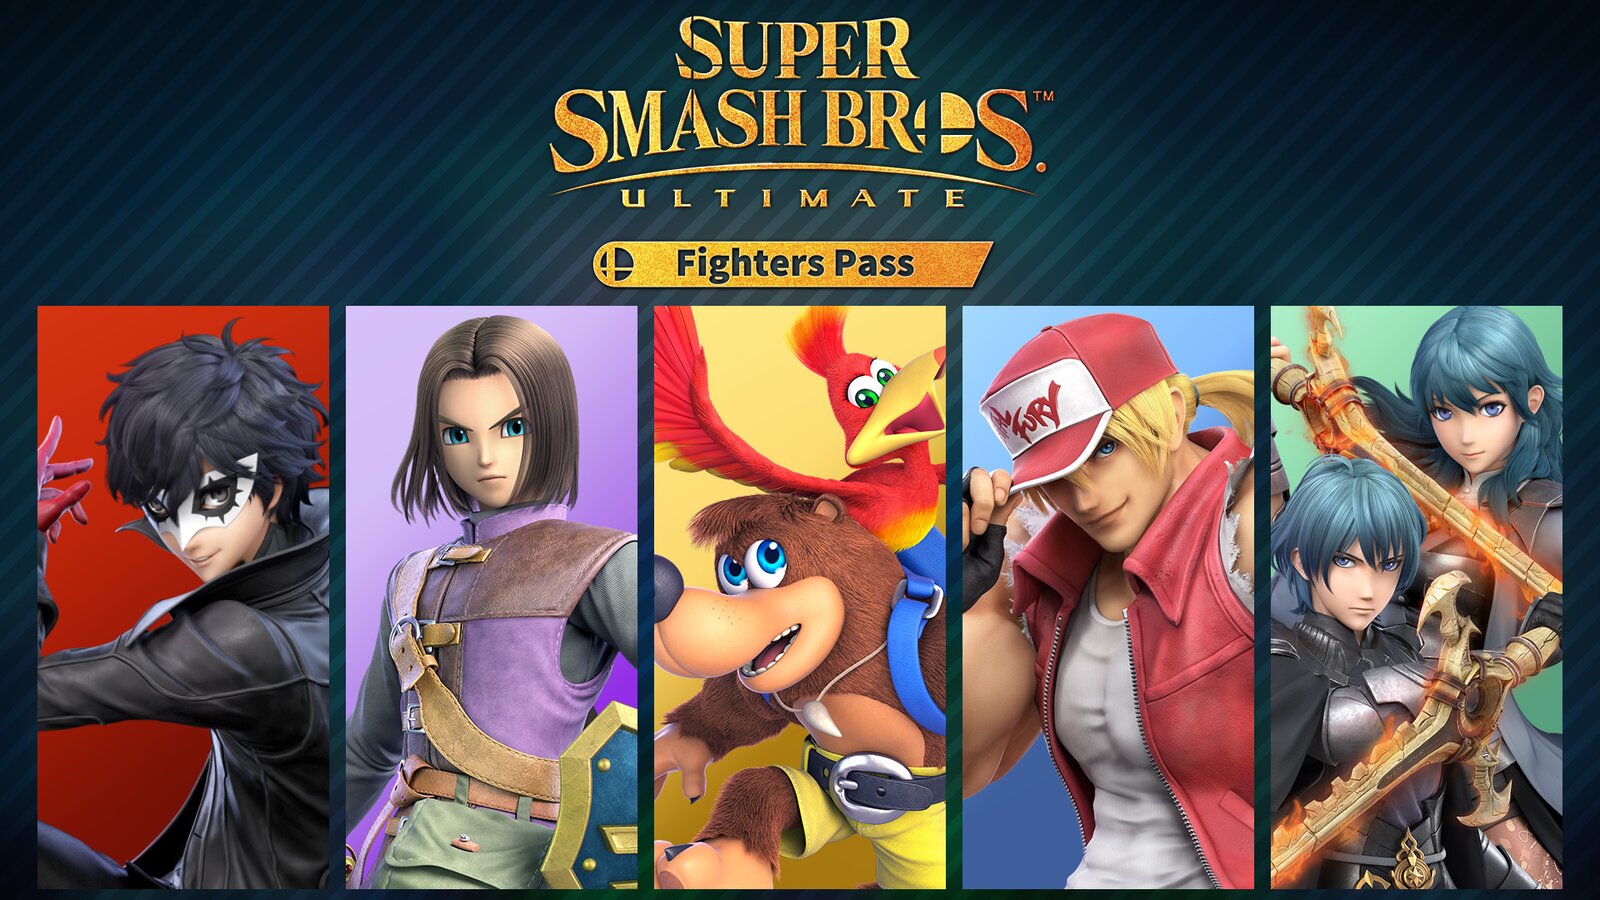 Super Smash Bros. Ultimate: Fighters Pass